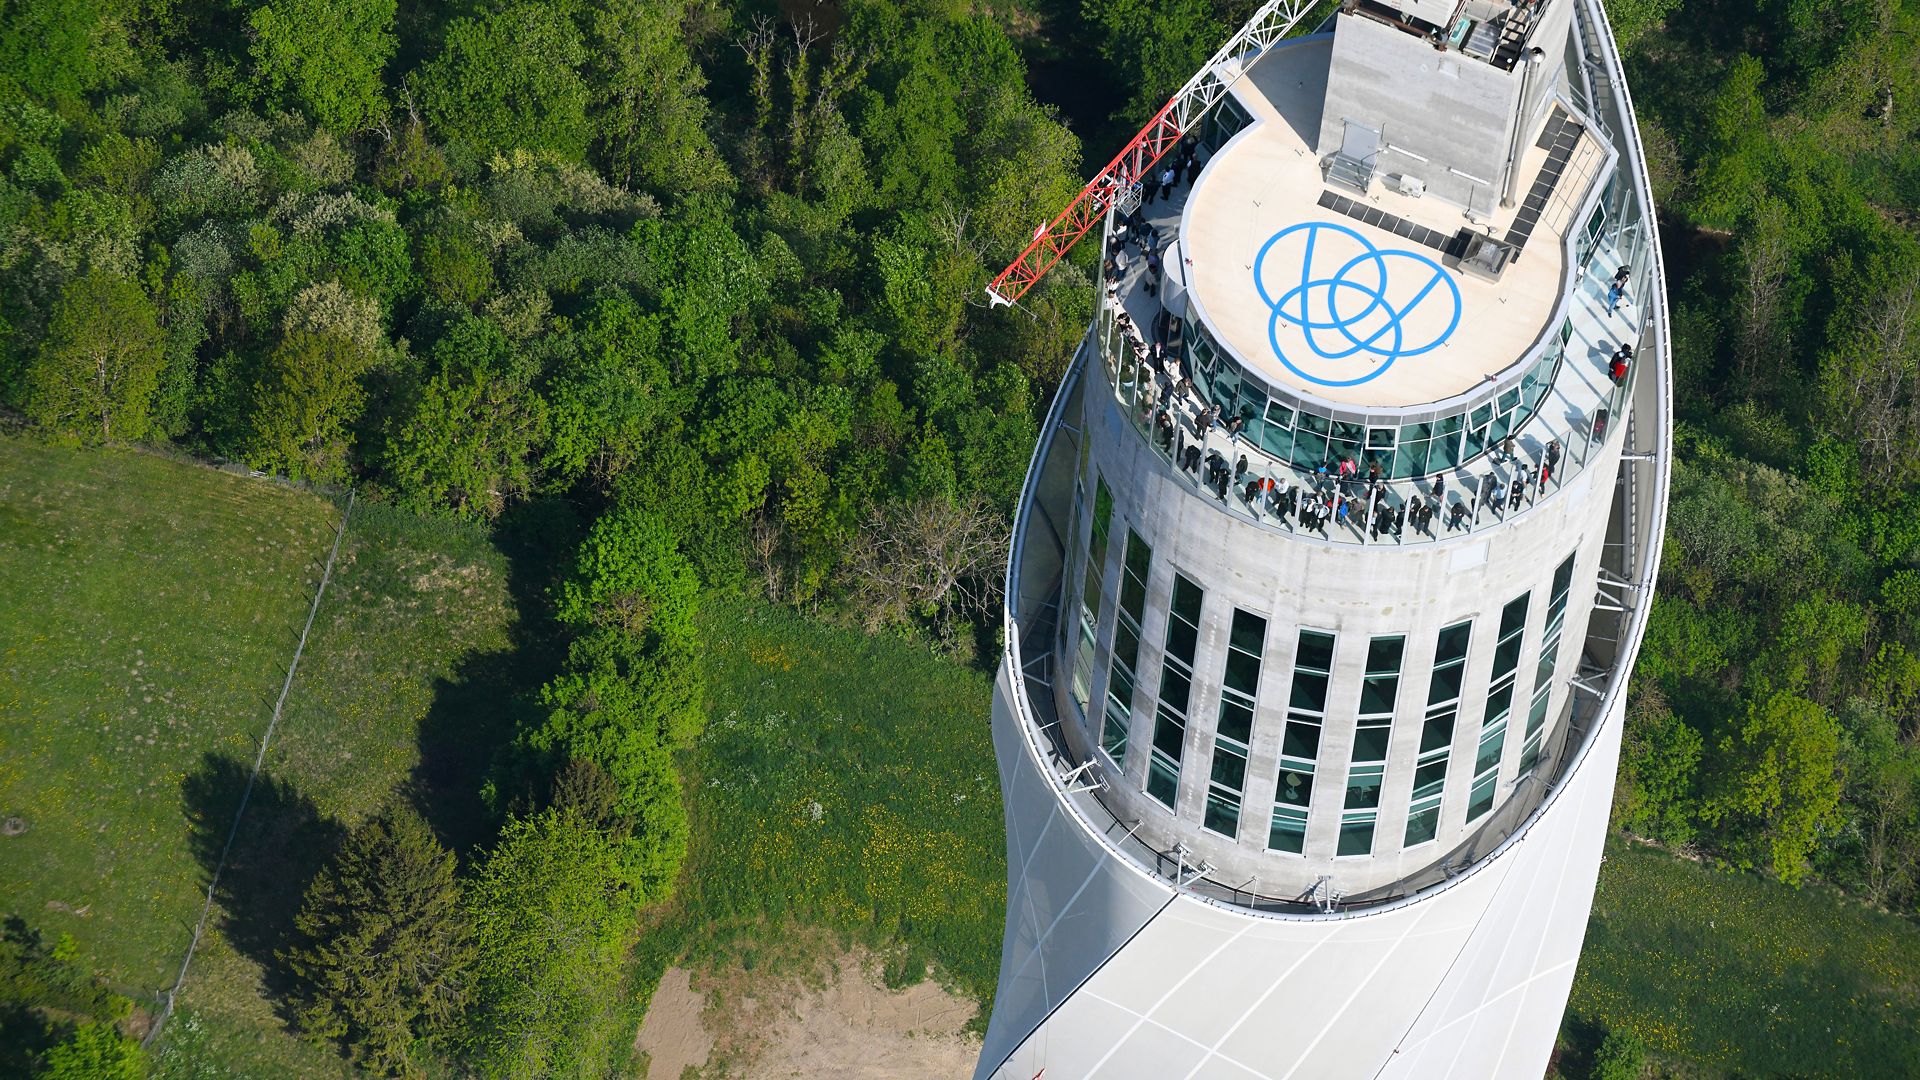 Sika roof graphics applied on Thyssenkrupp elevator test tower in Rottweil, Germany